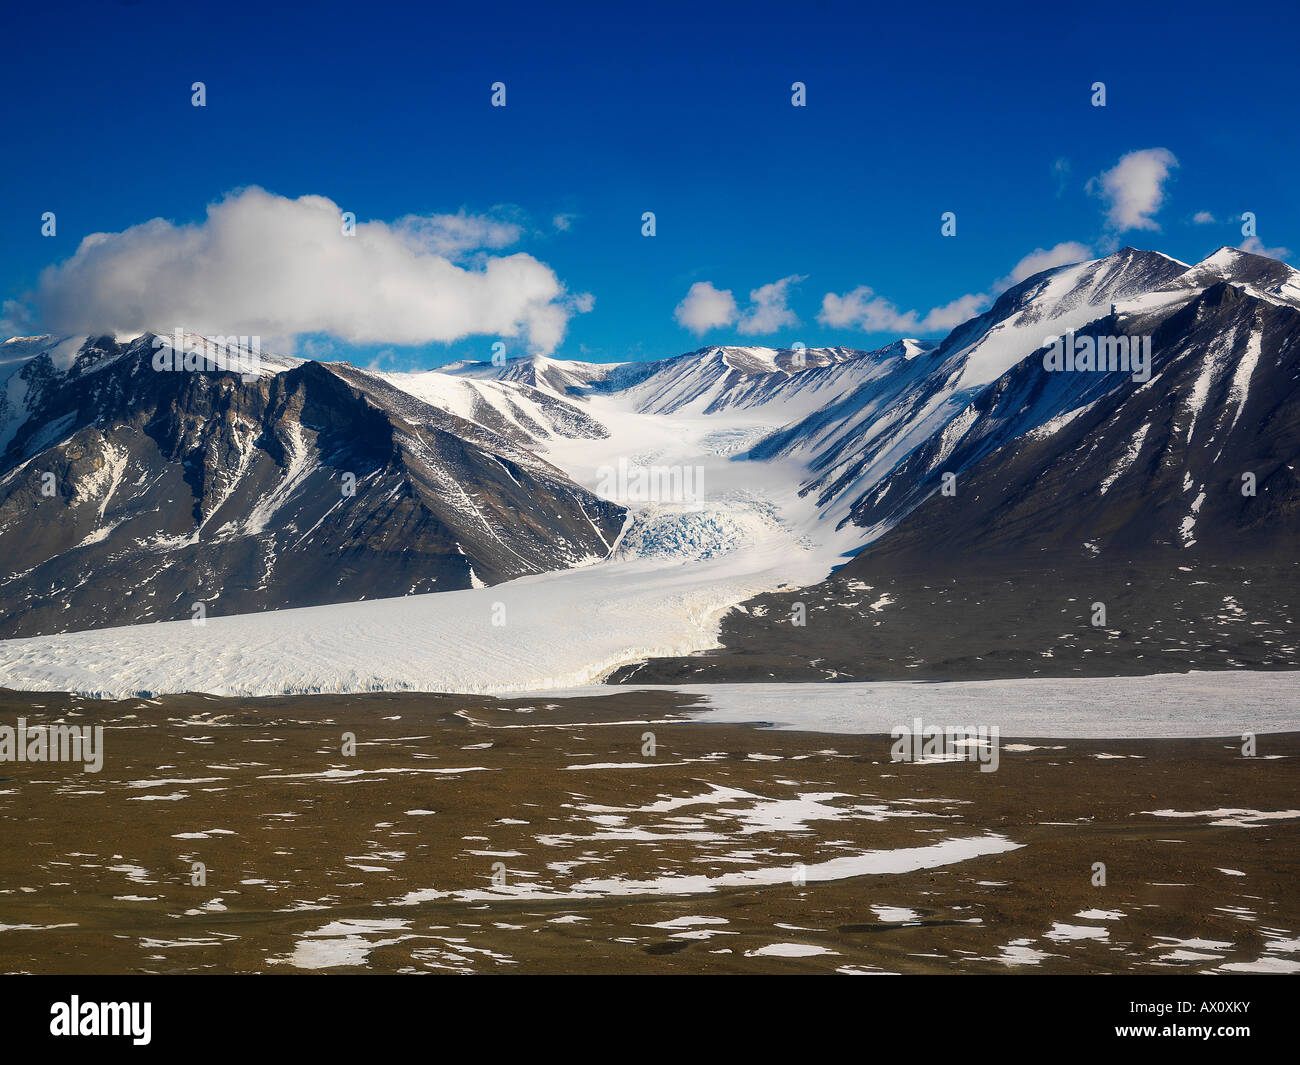 Canada Glacier seen from a helicopter, Taylor Valley, McMurdo Dry Valleys, Antarctica Stock Photo